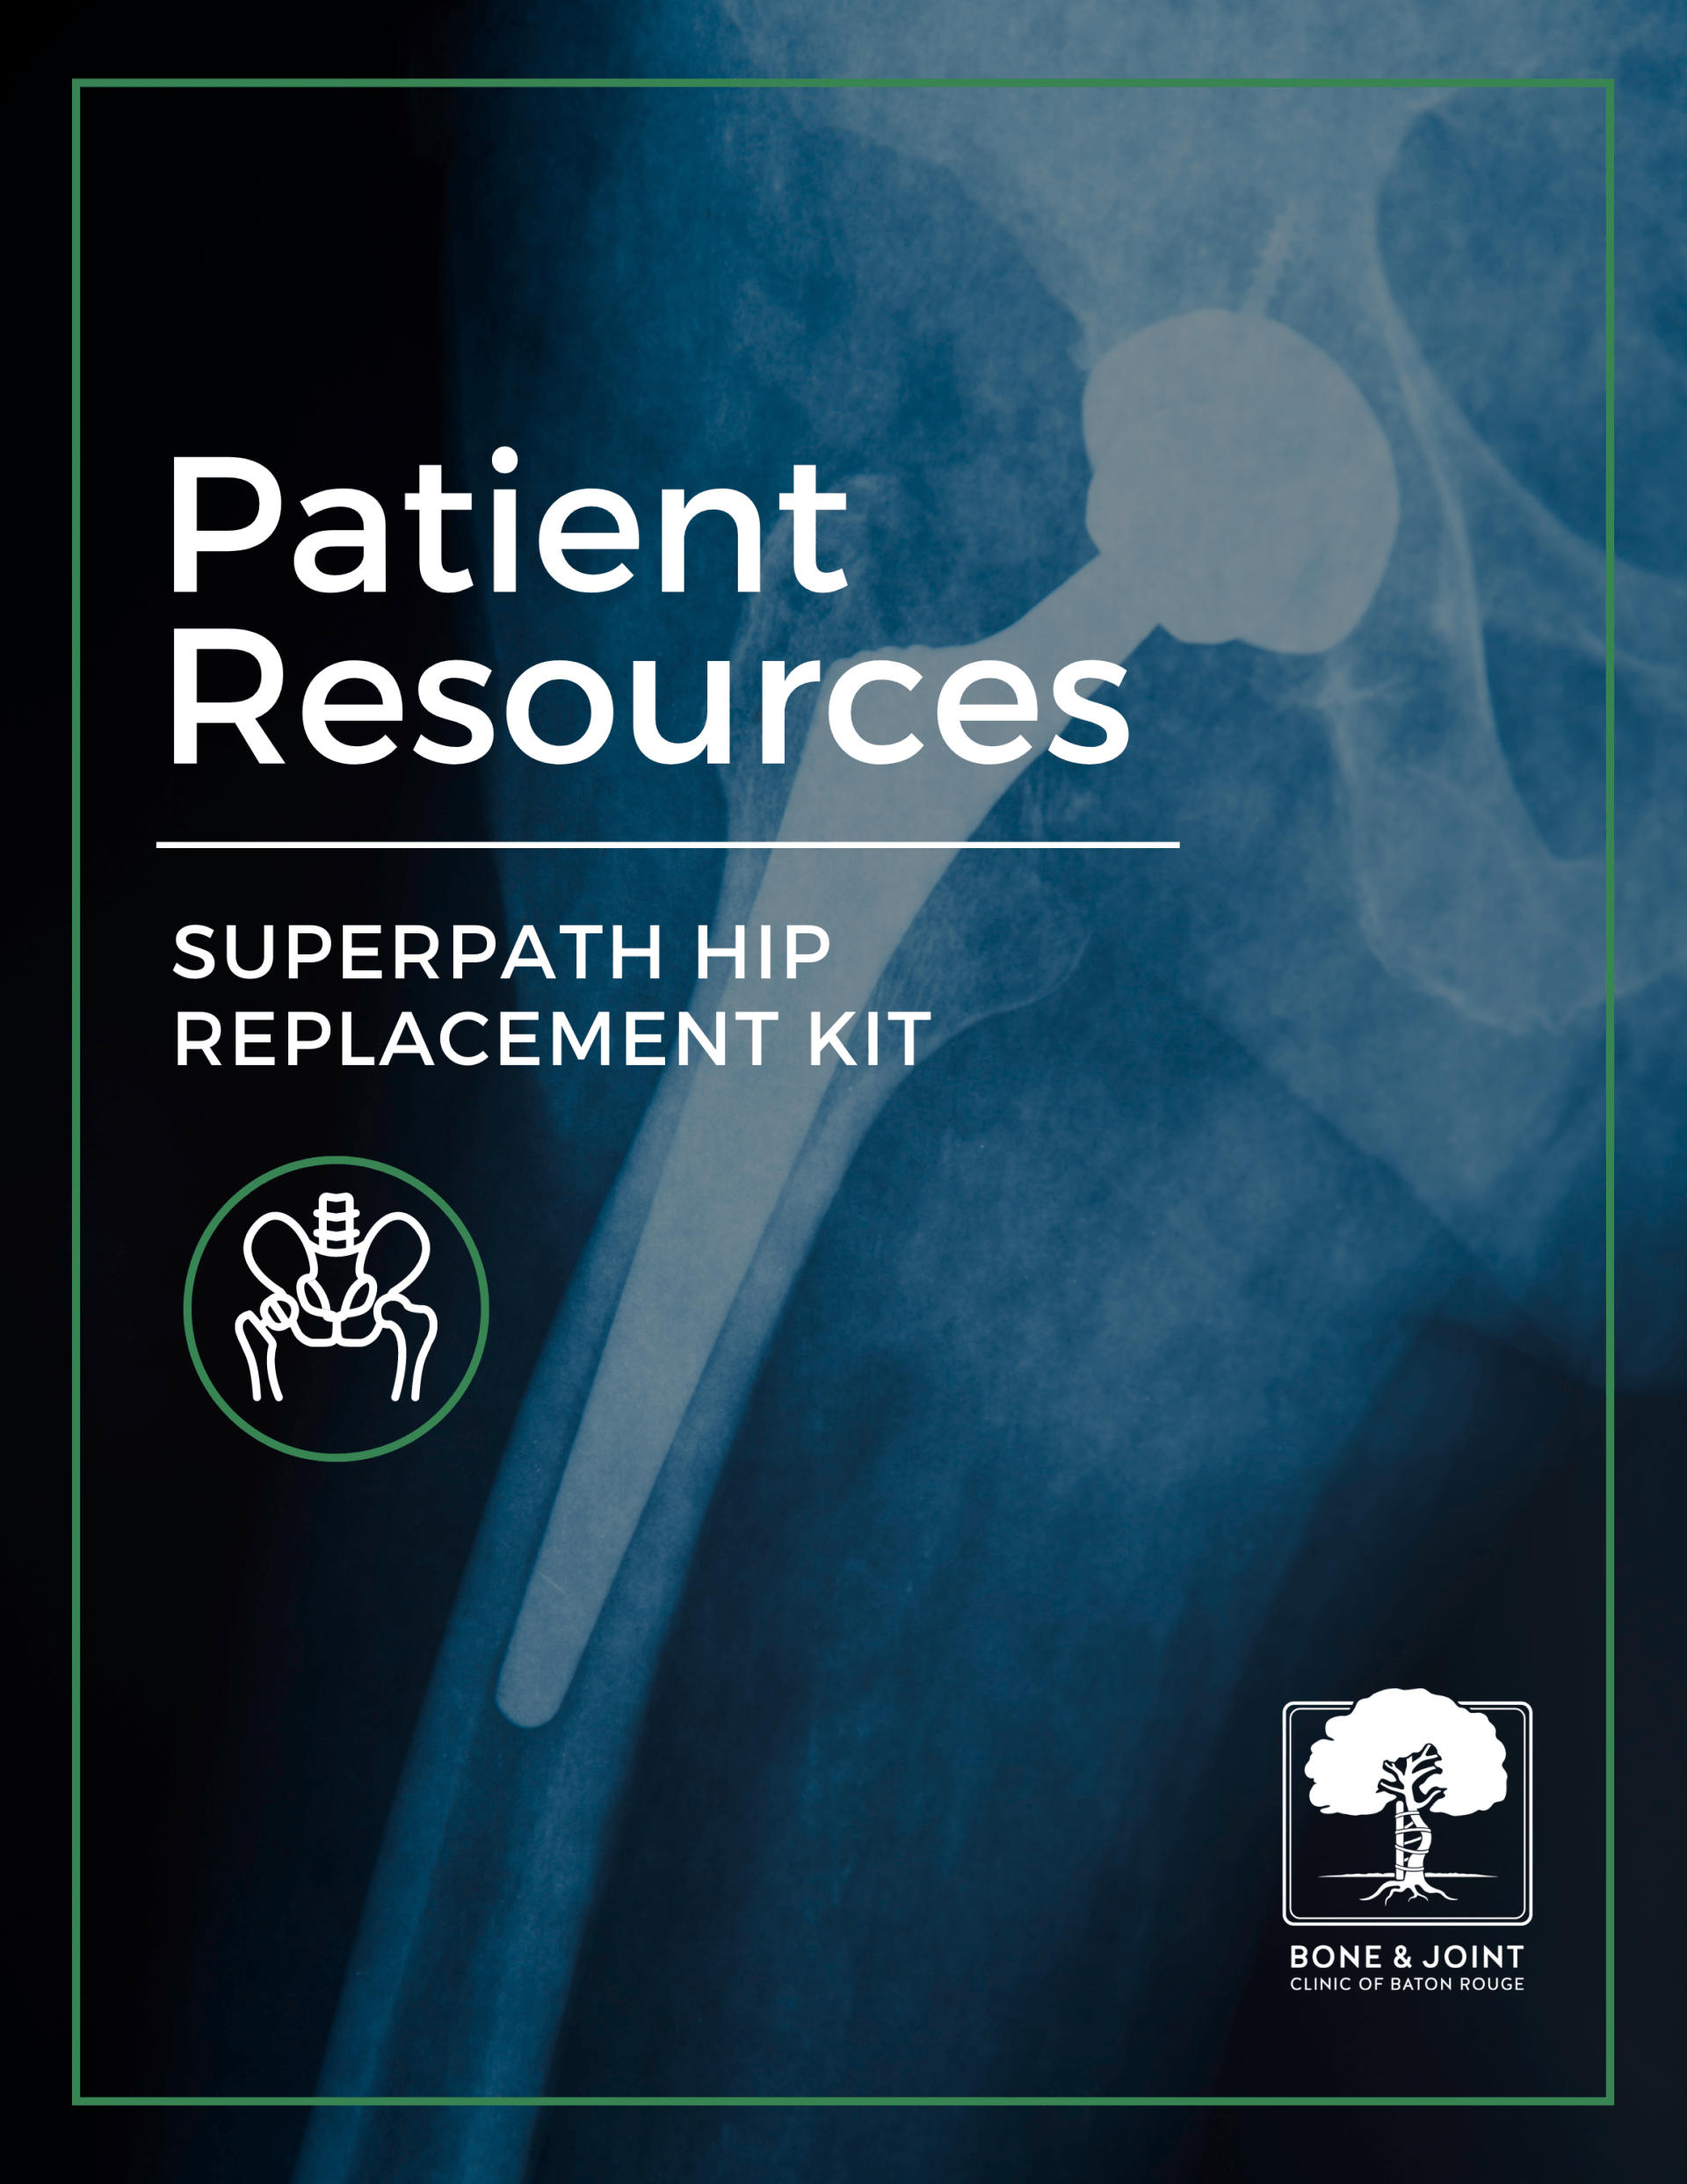 Superpath hip replacement patient resource kit